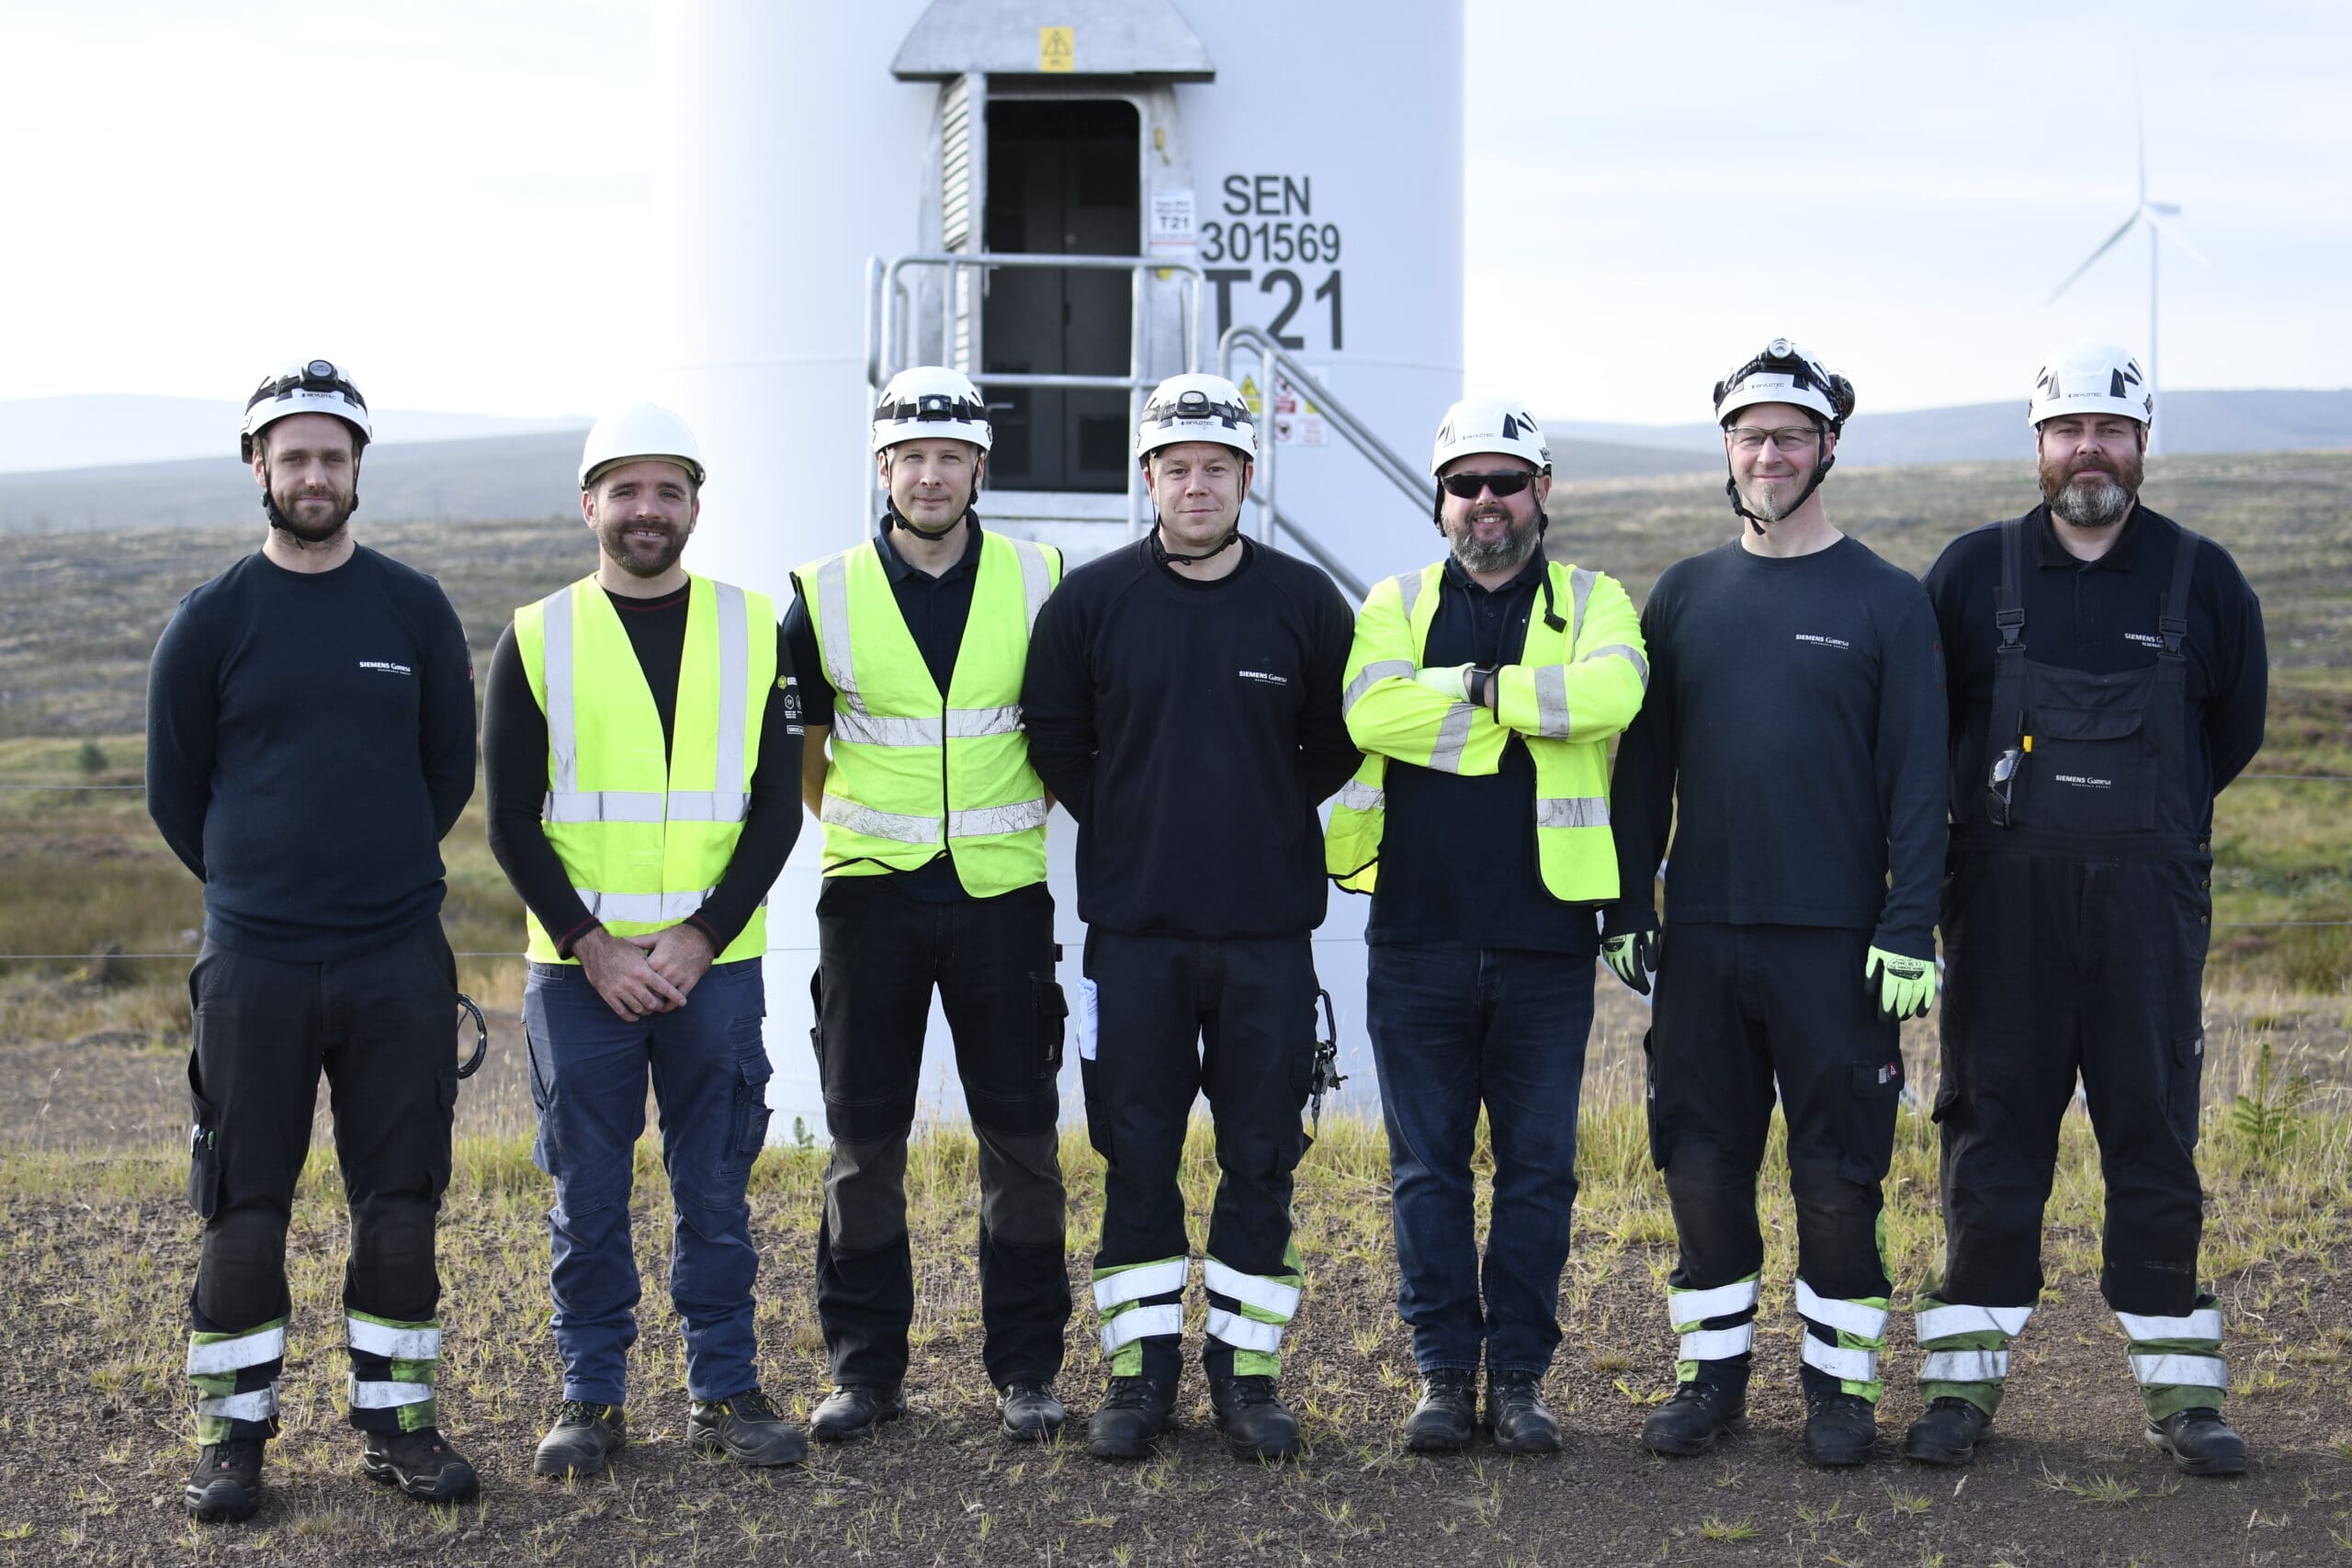 Kype muir wind farm manager, Euan Wright with SGRE technical team